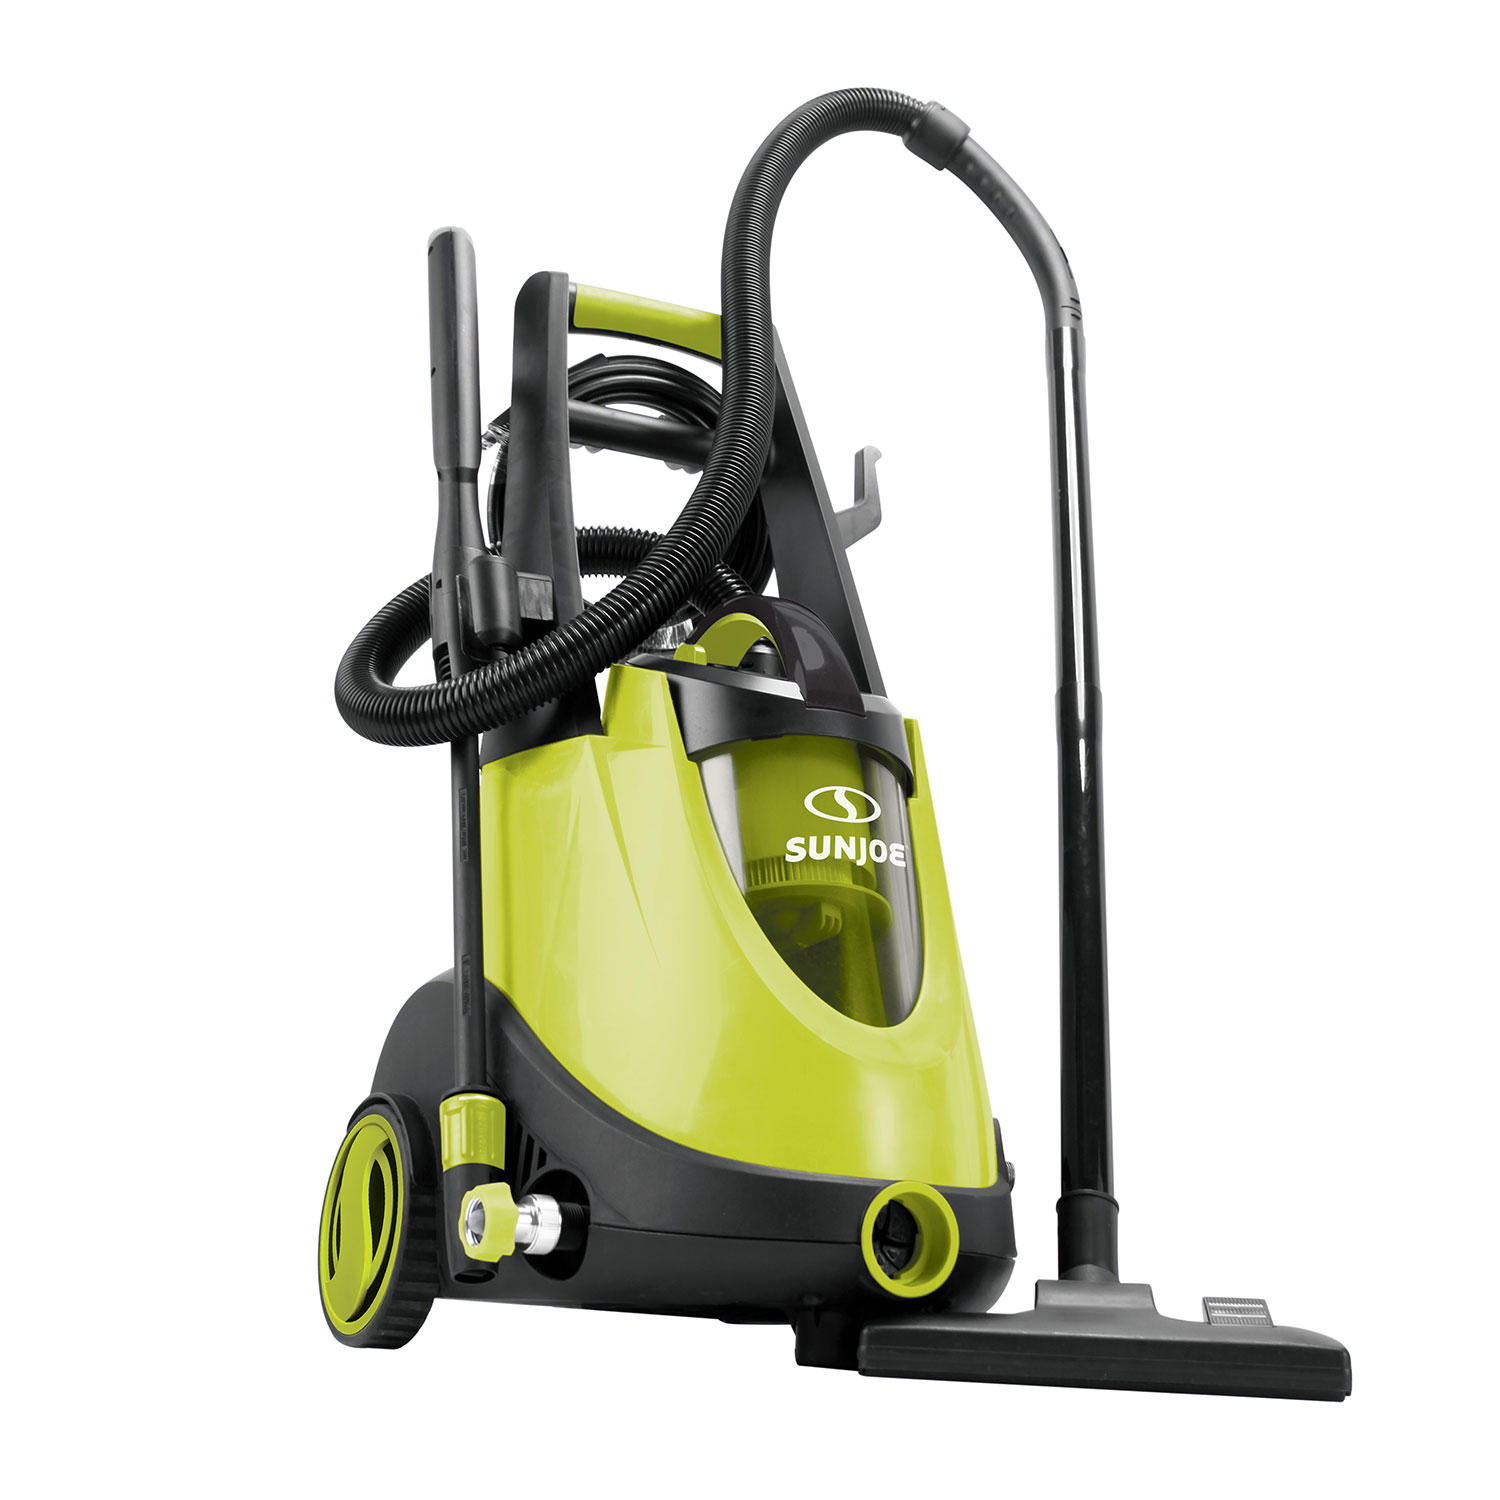 Sun Joe SPX7000E 2-in-1 Electric Pressure Washer with Built-in Wet/Dry Vacuum